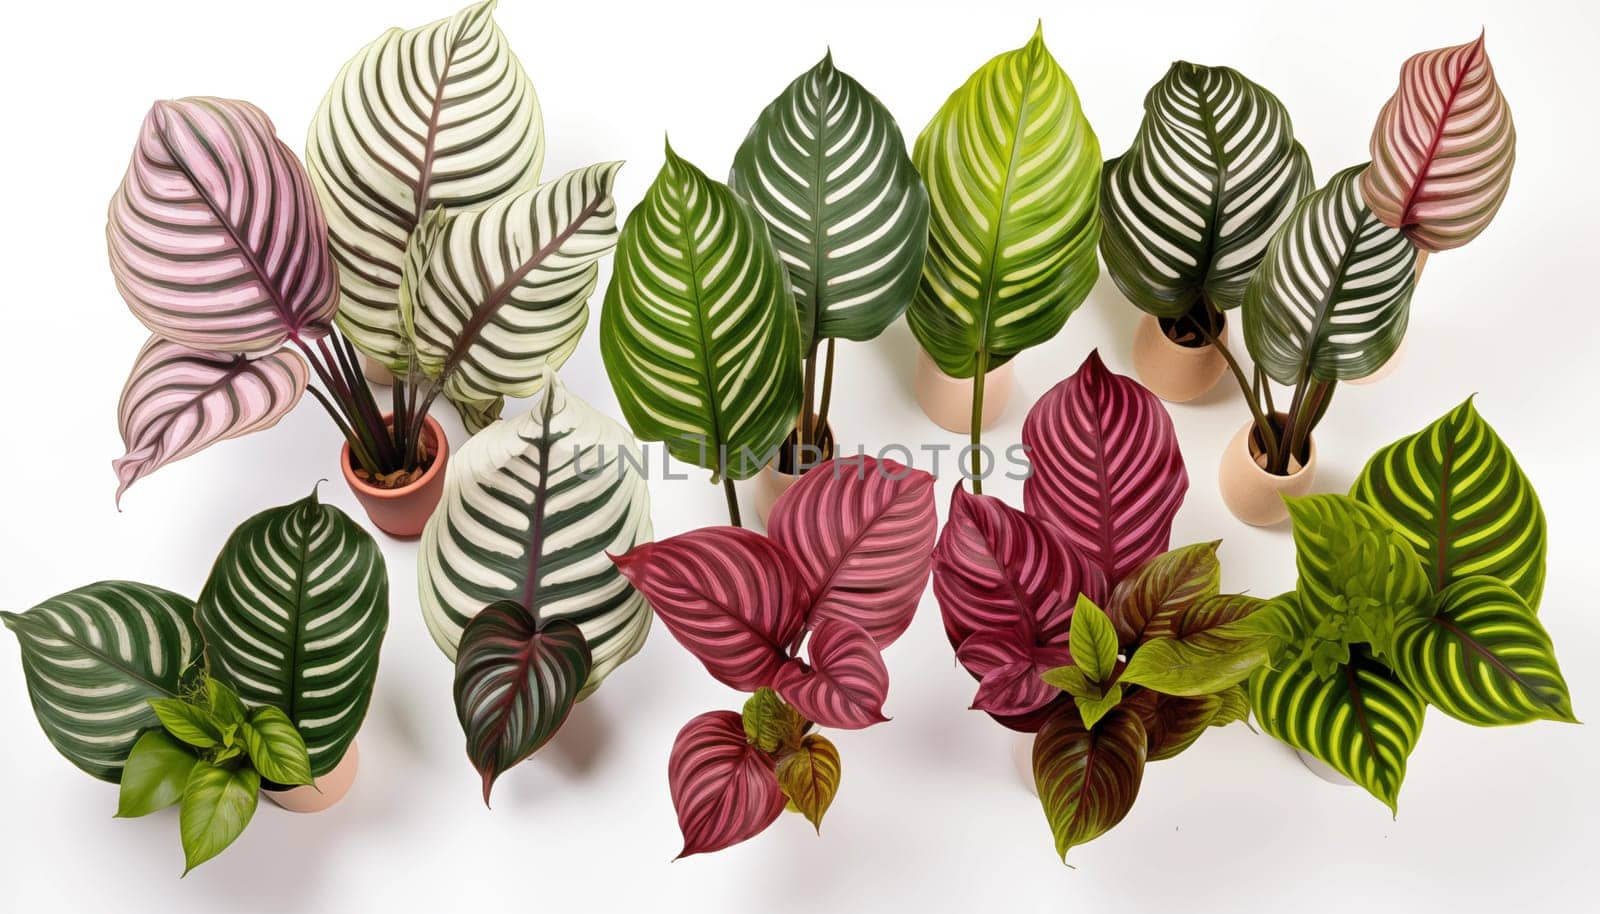 group of different Calathea varieties displaying by Nadtochiy